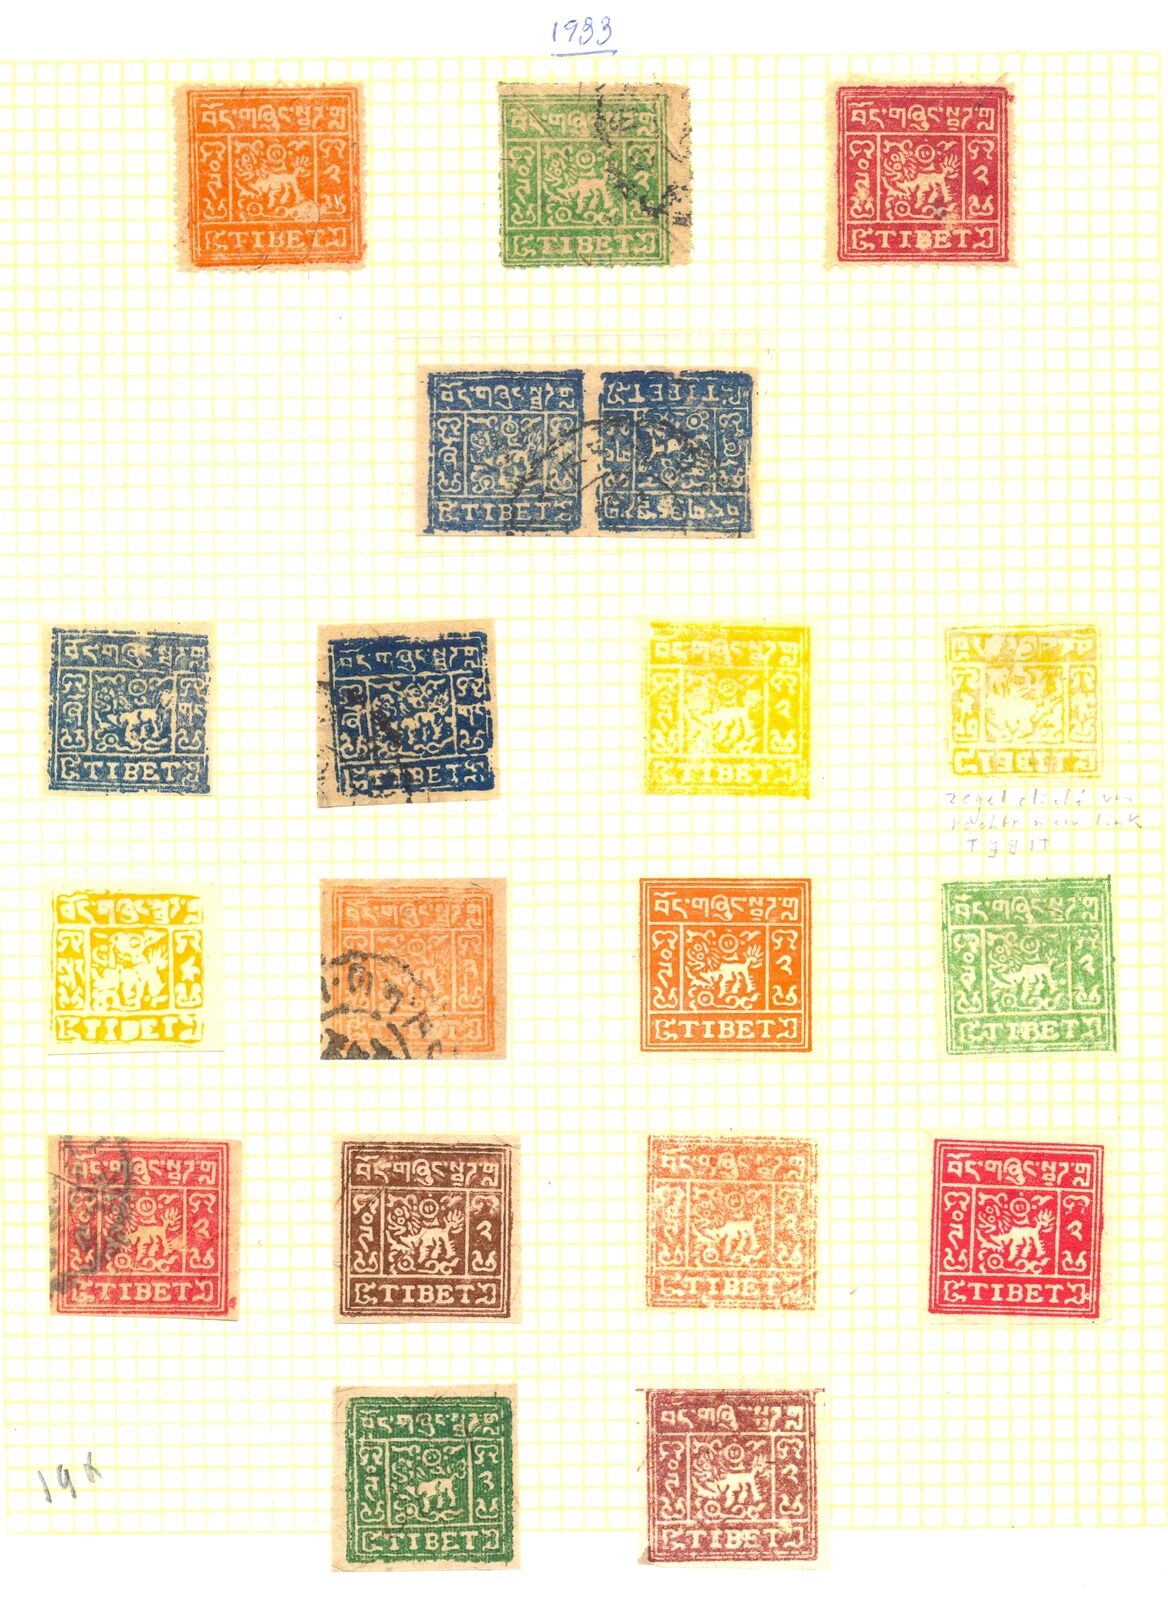 Asia - Tibet -19 Stamps Reprints /old Fakes - Good Reference @24